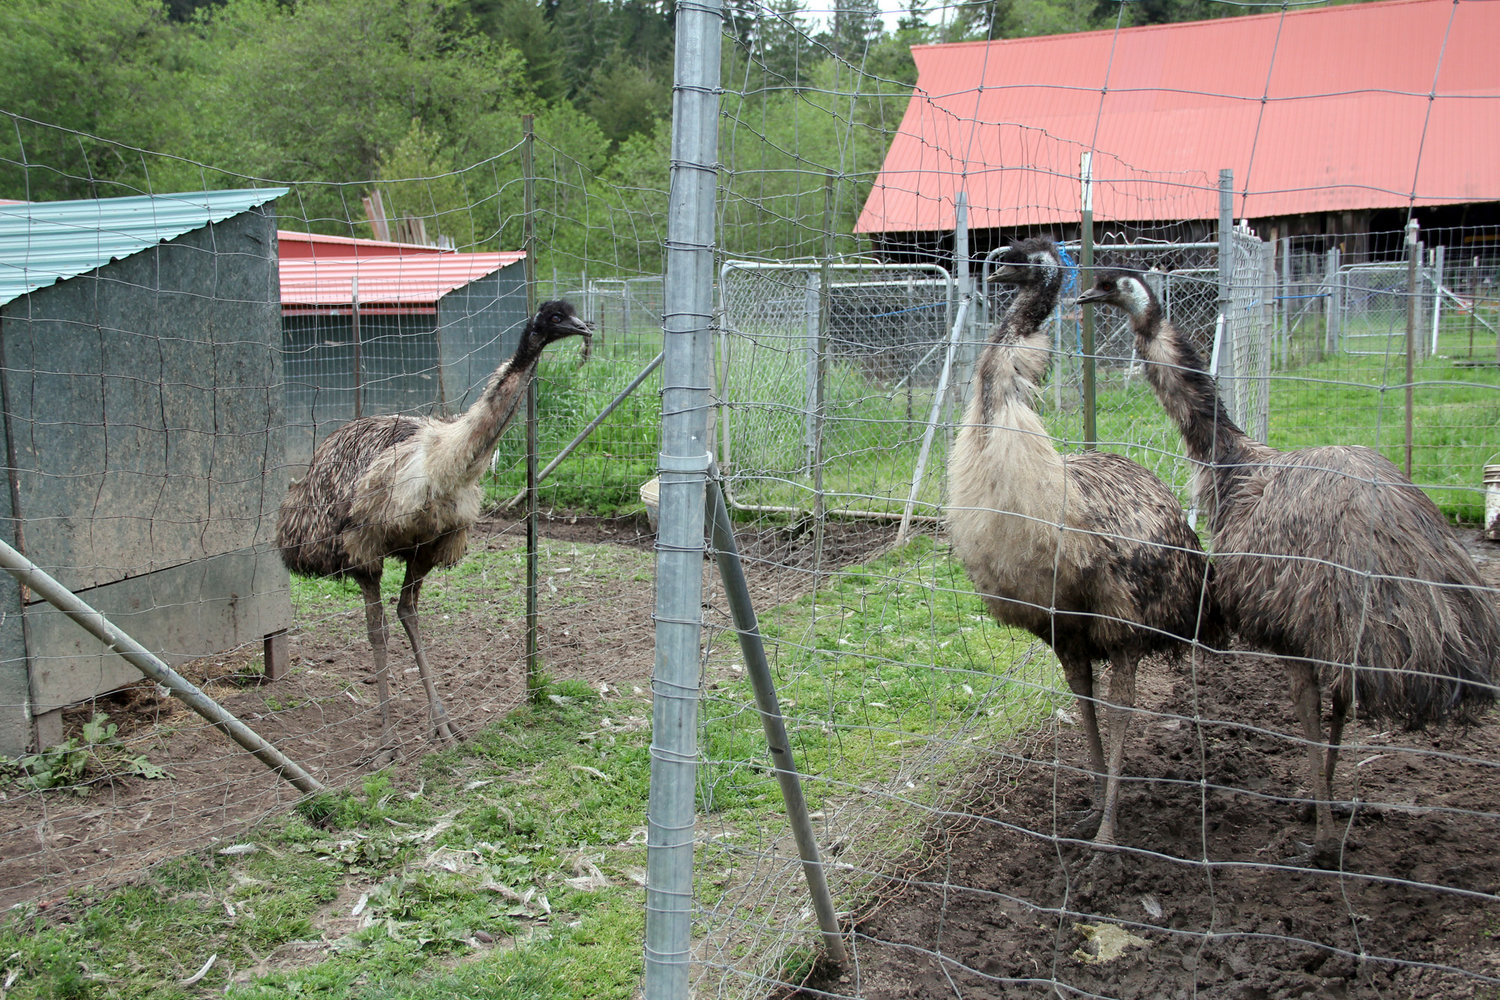 An adult emu sticks its head out of the fence toward two other emus at 3 Feathers Emu Ranch and Farm near Adna on Friday.